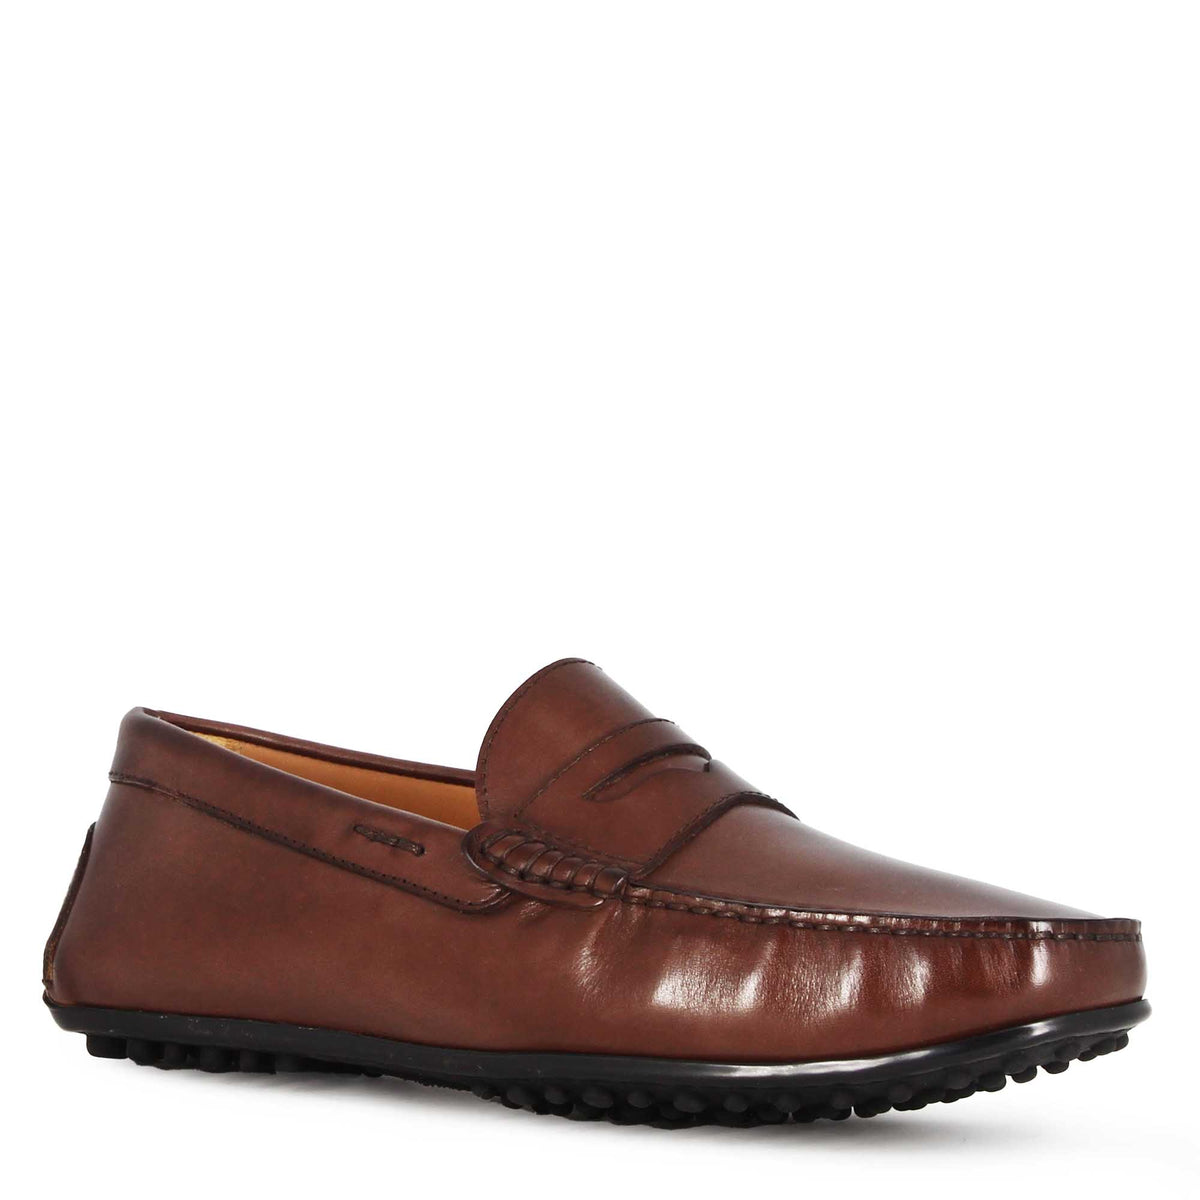 Casual men's moccasin in dark brown leather with rubber pebbled sole